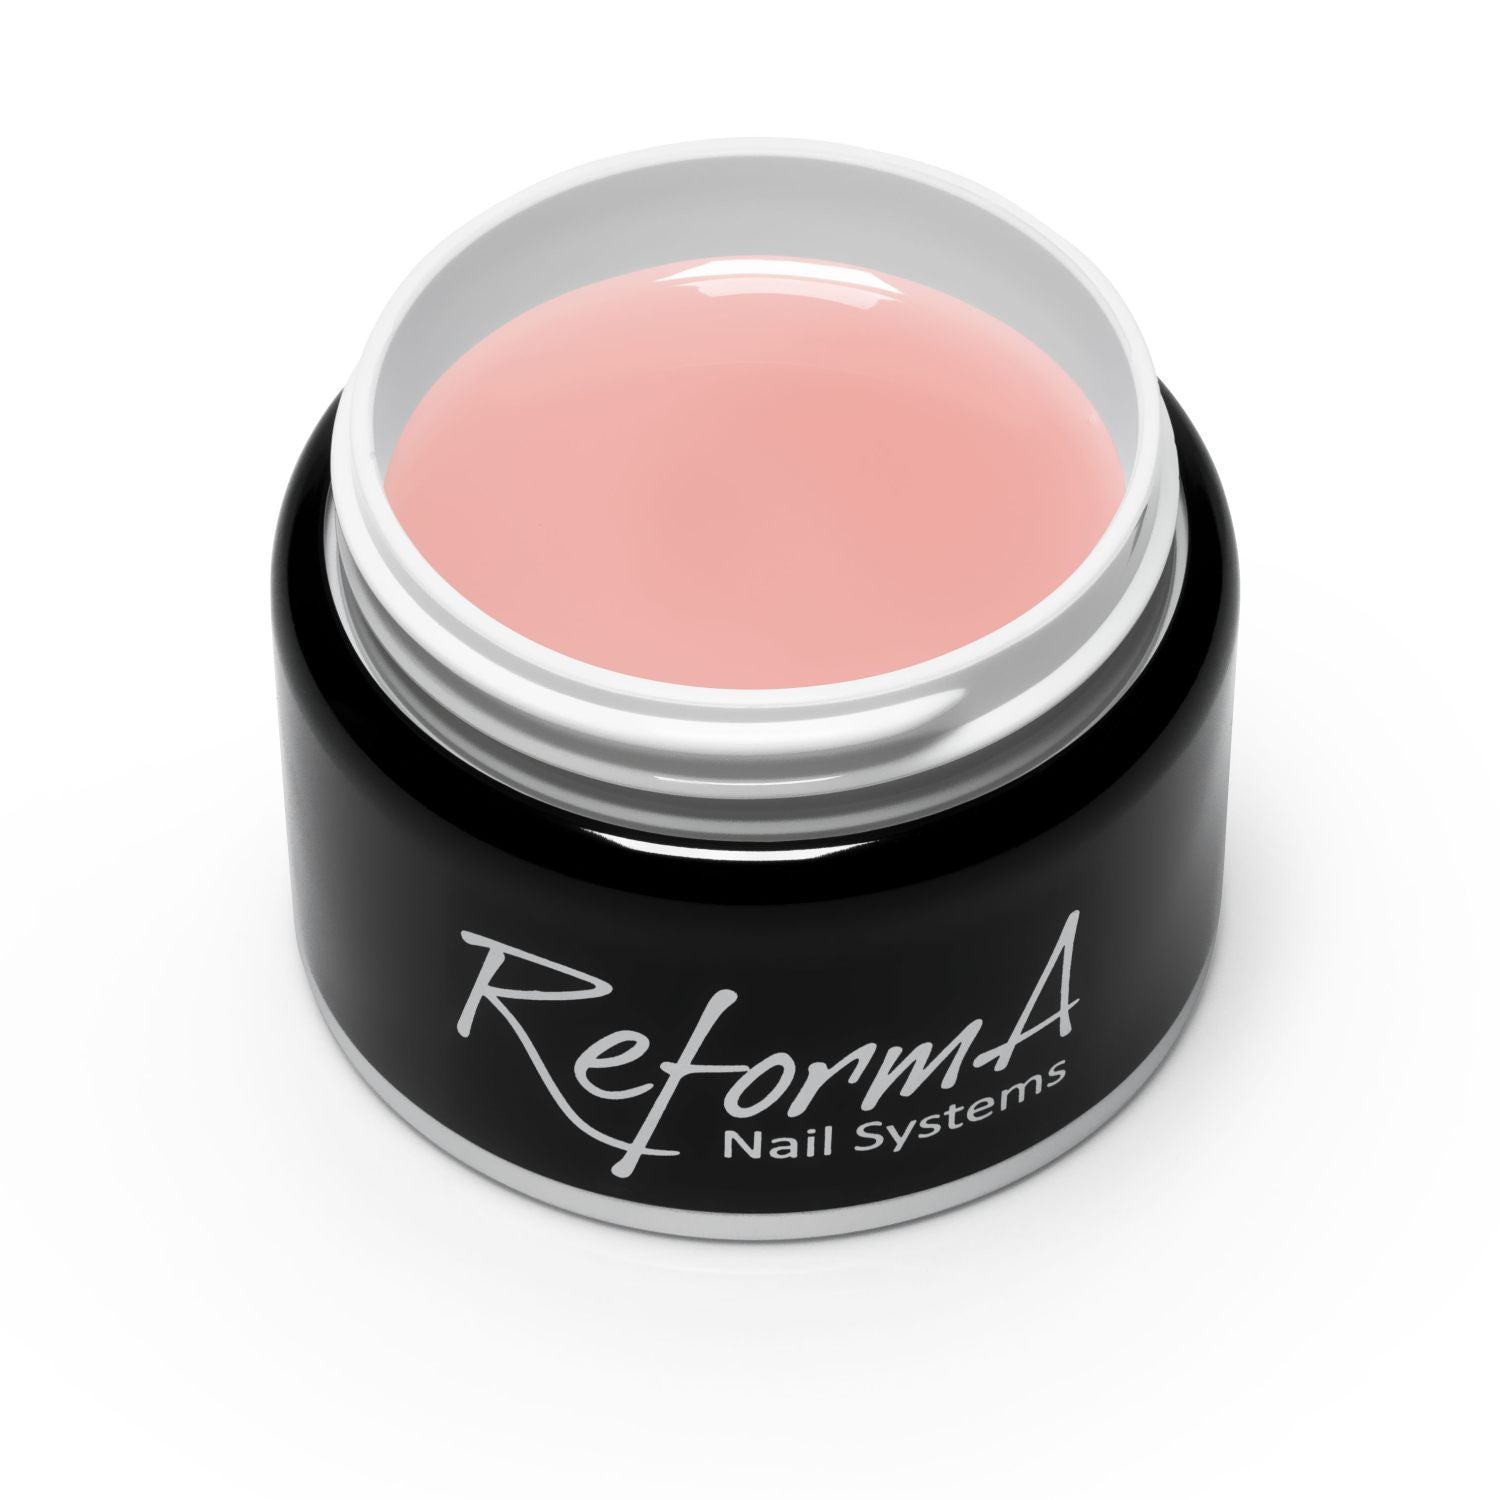 Camouflage Gel - Baby Pink, 14 g